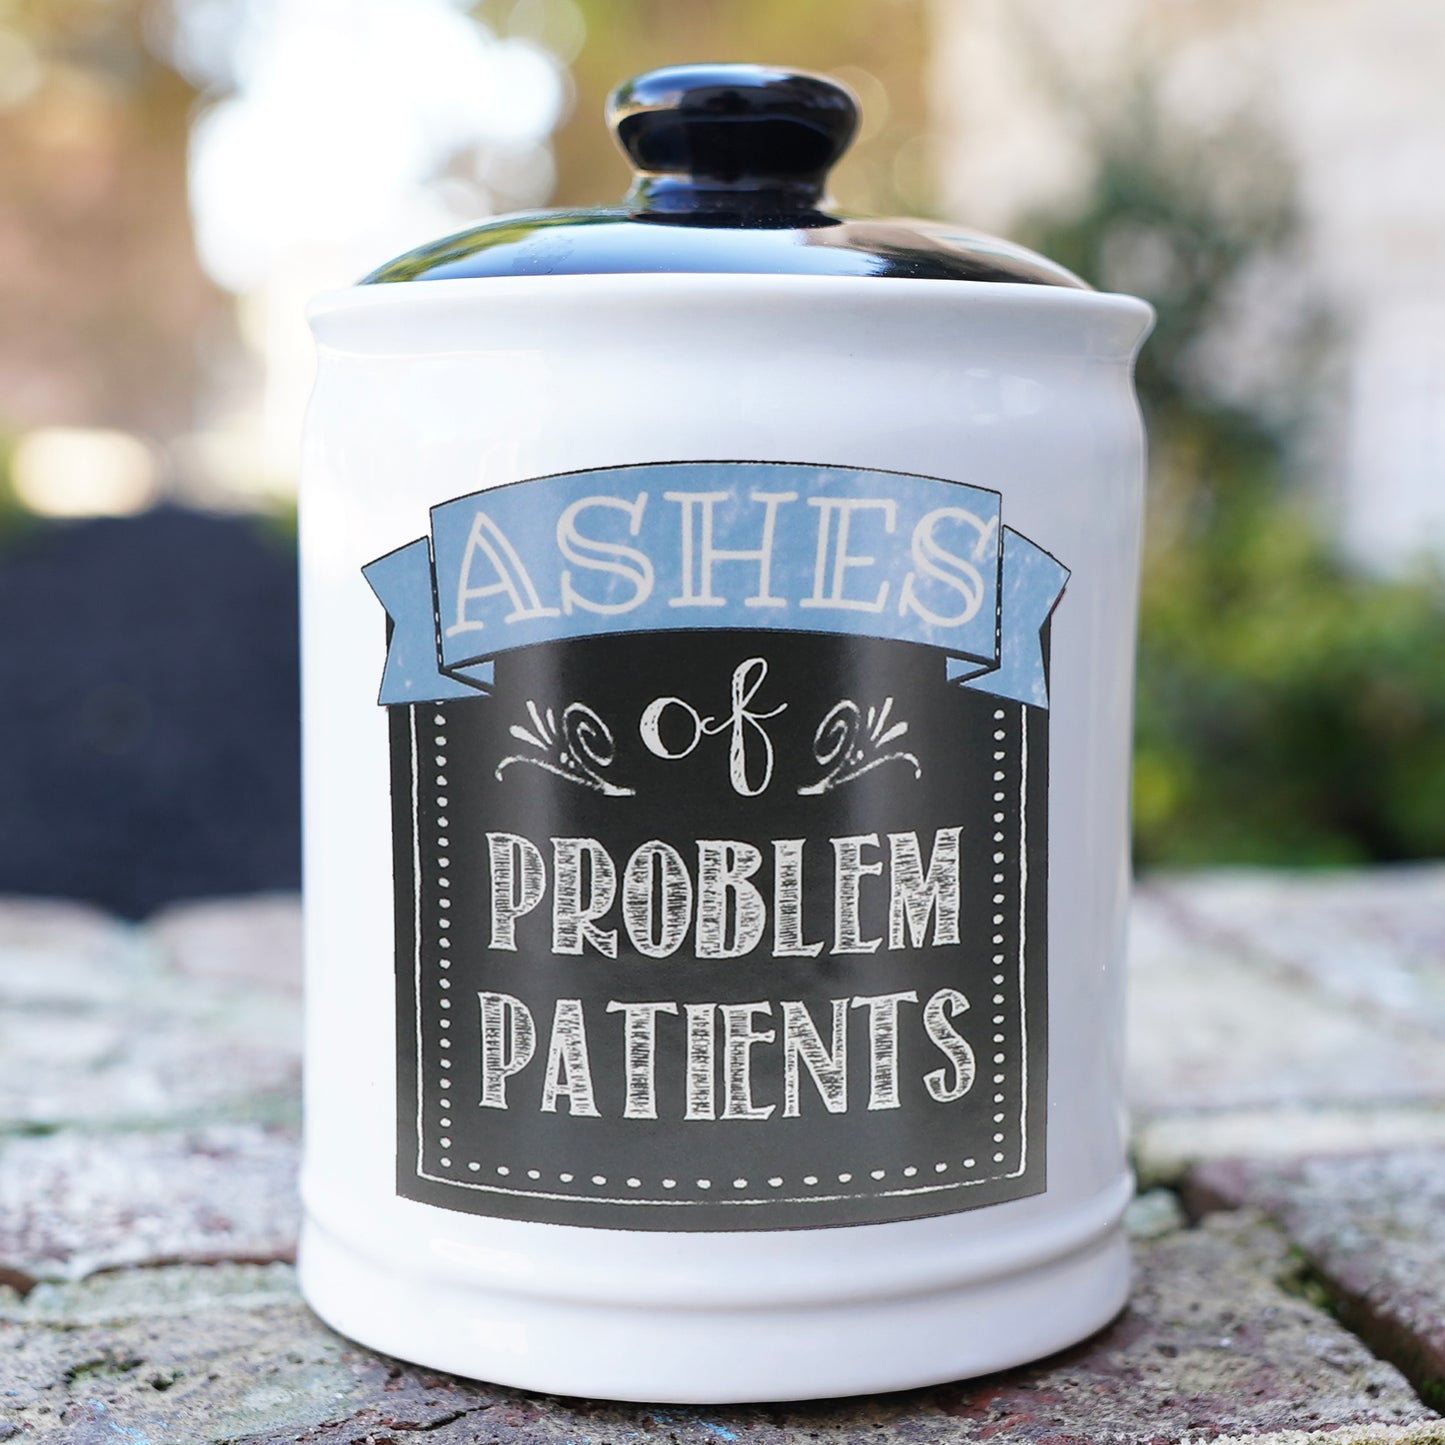 Cottage Creek Ashes of Problem Patients Piggy Bank, Multicolored, 6", Ceramic Office Candy Jar, Nurse Doctor Gifts